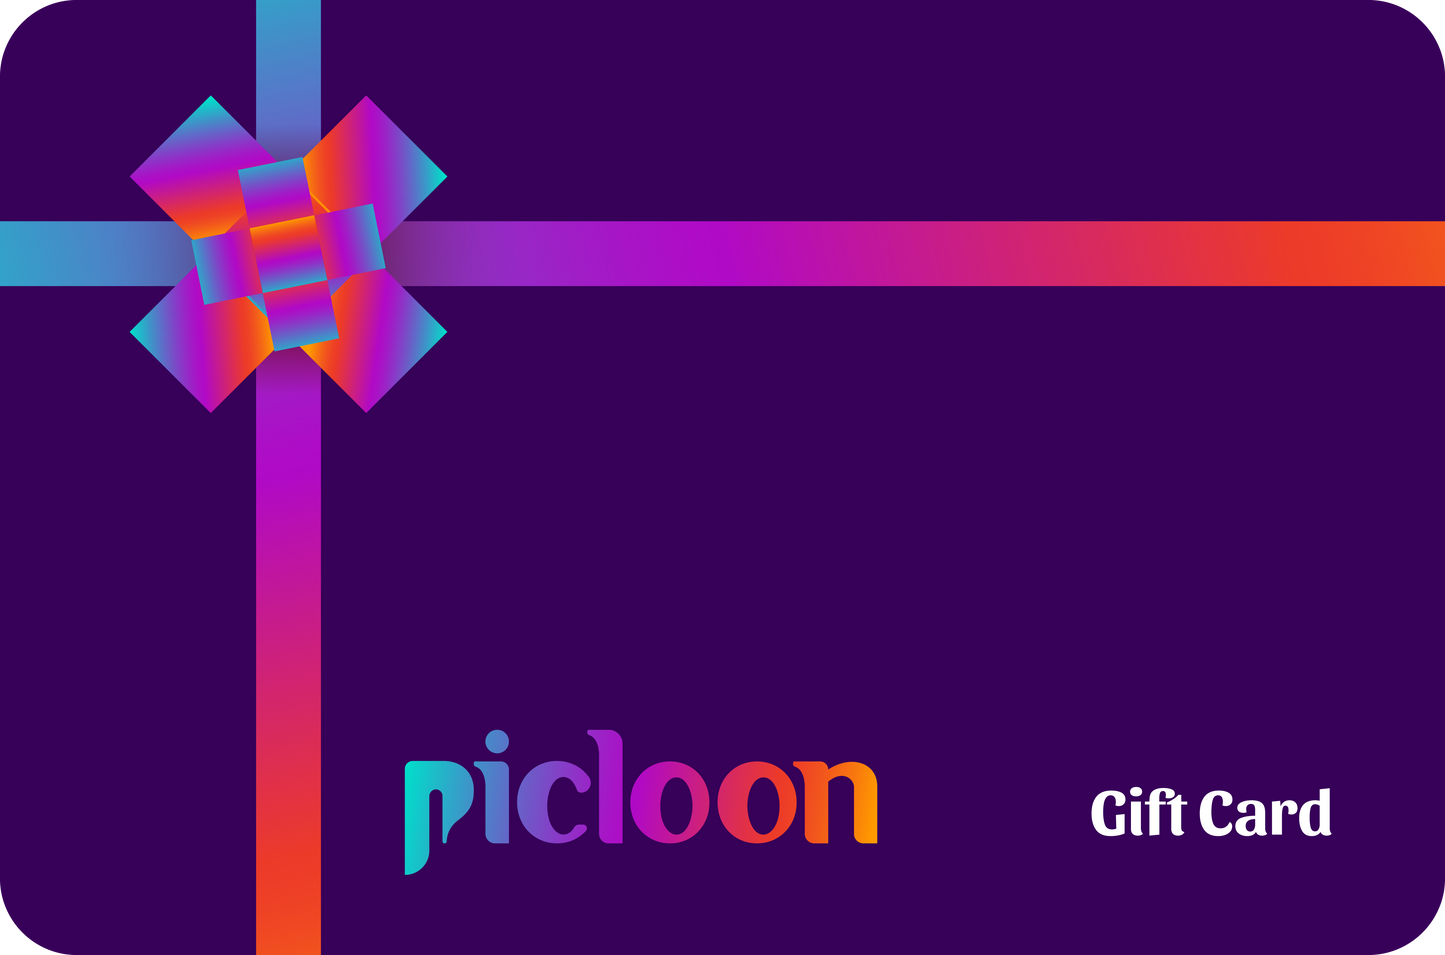 picloon gift card